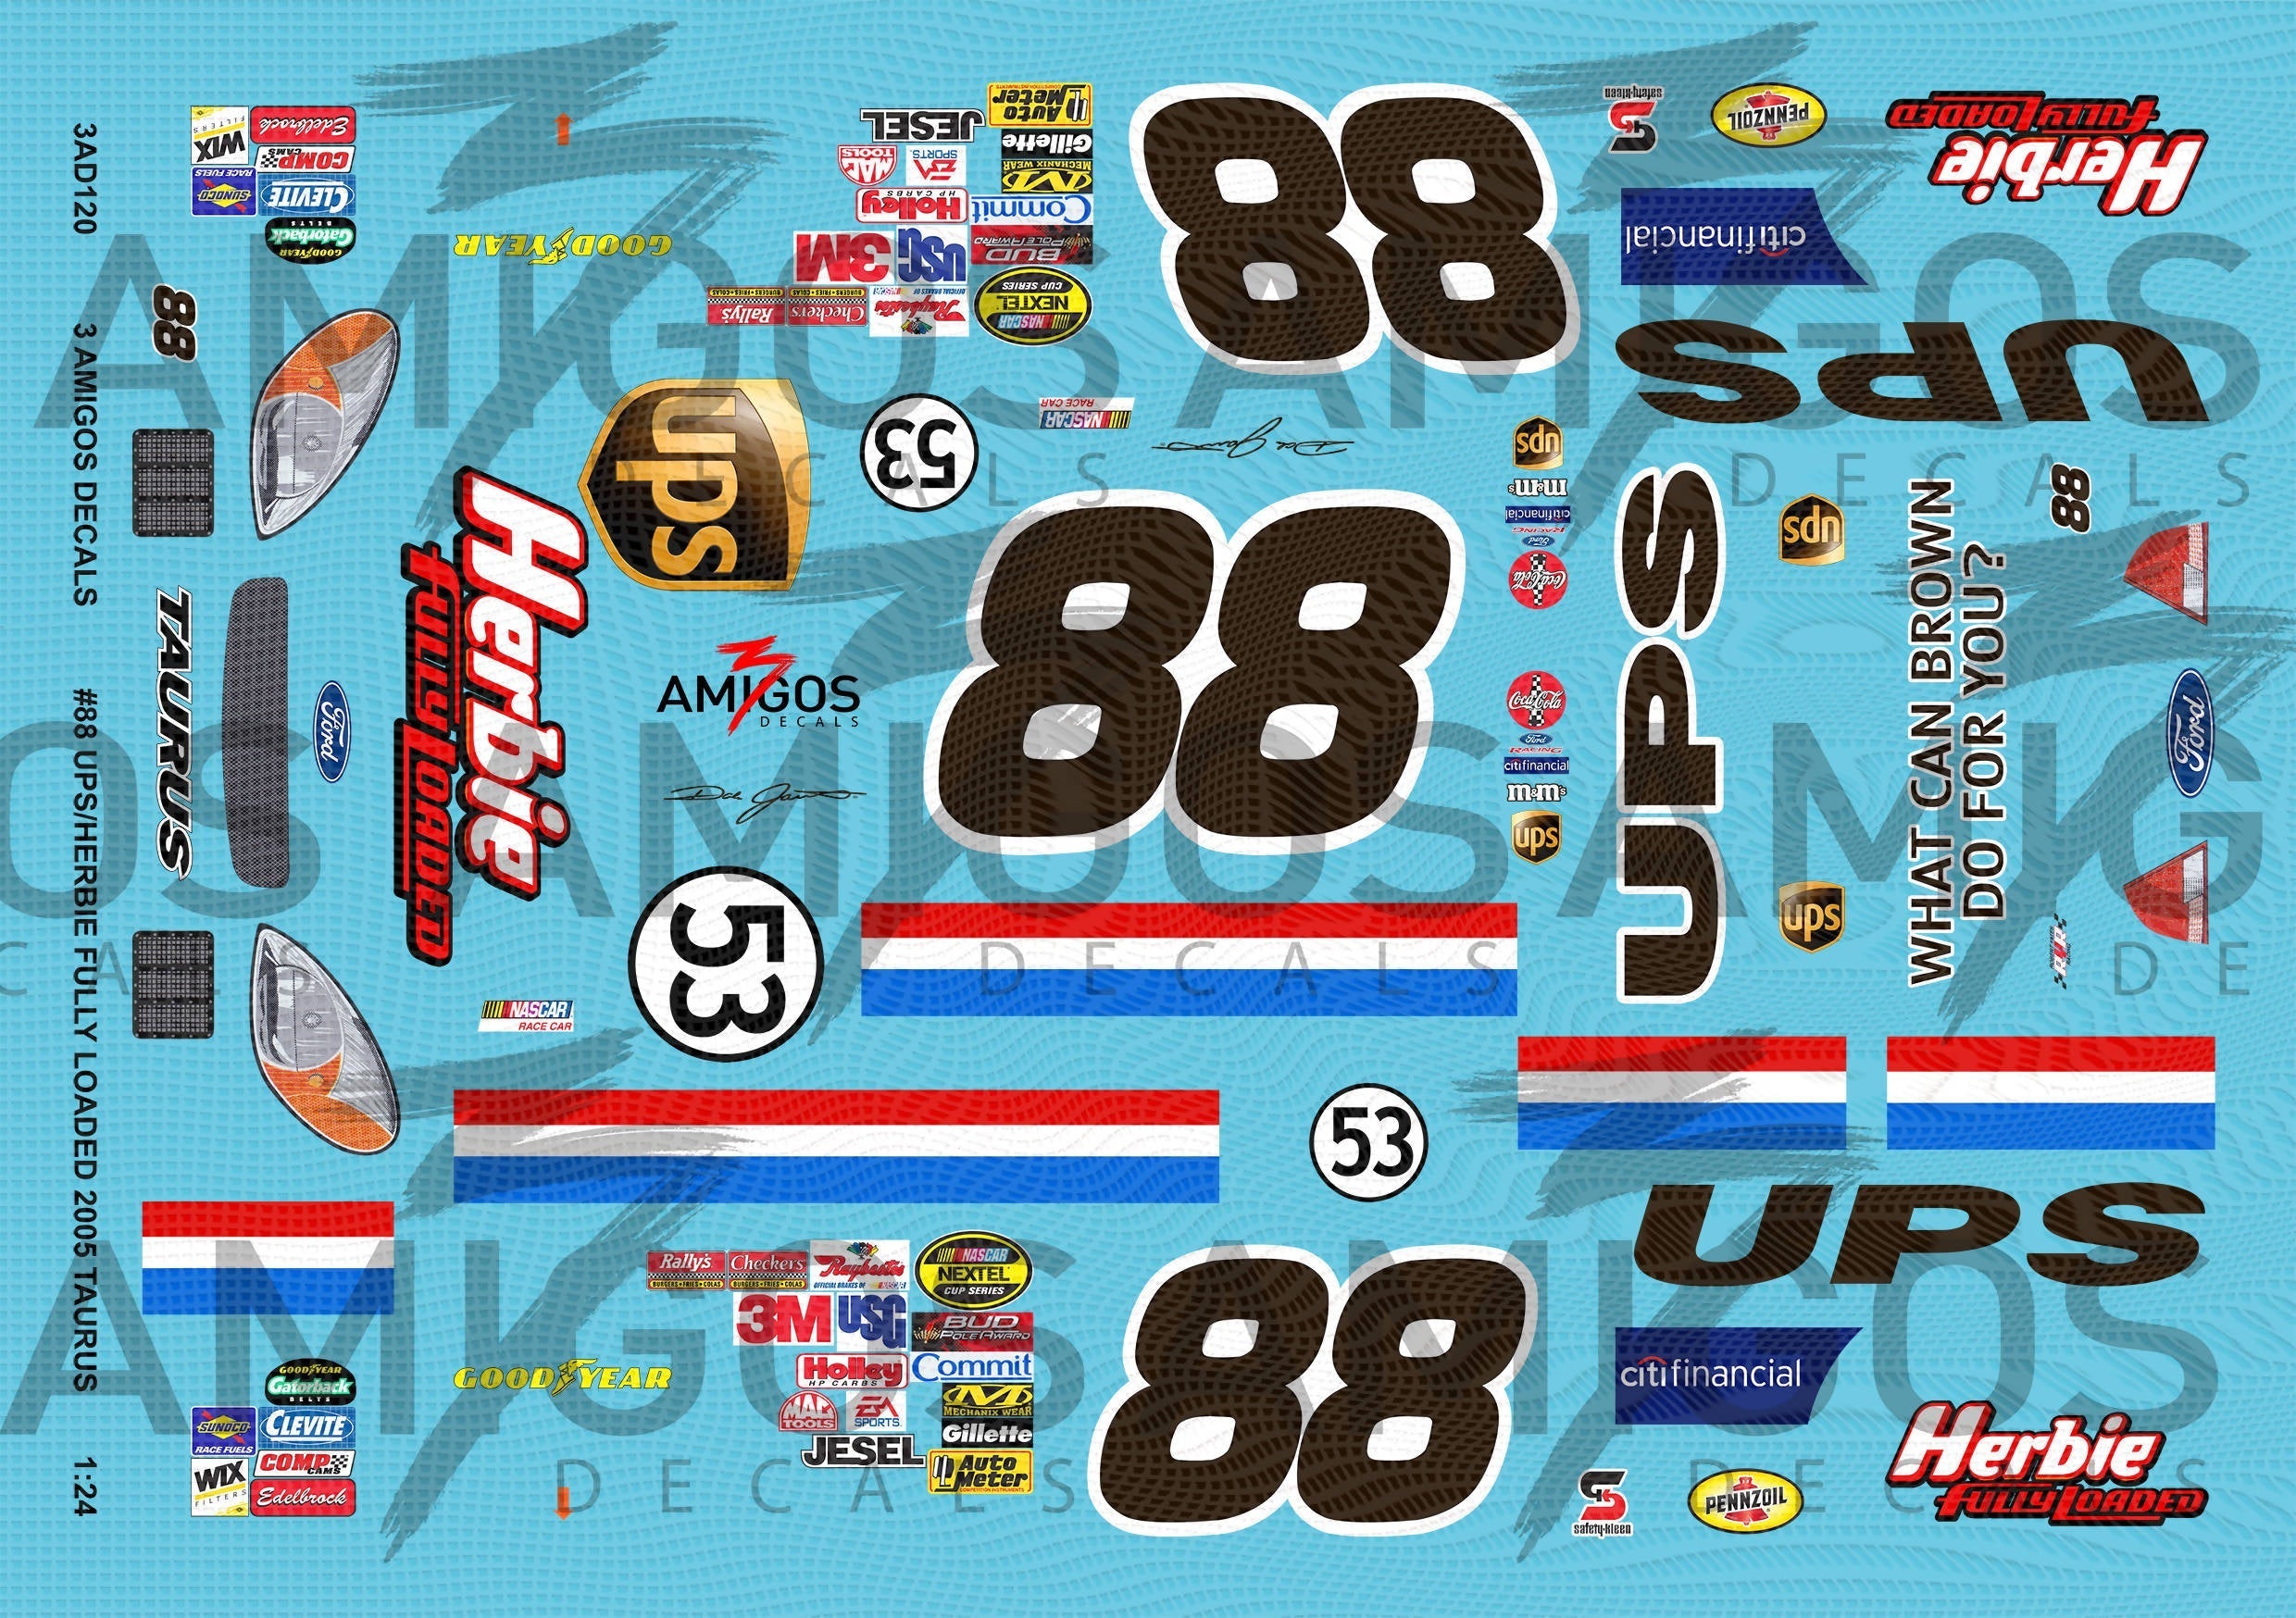 3 Amigos Decals #88 UPS Herbie Fully Loaded 2005 Taurus 1:24 Decal Set - 1